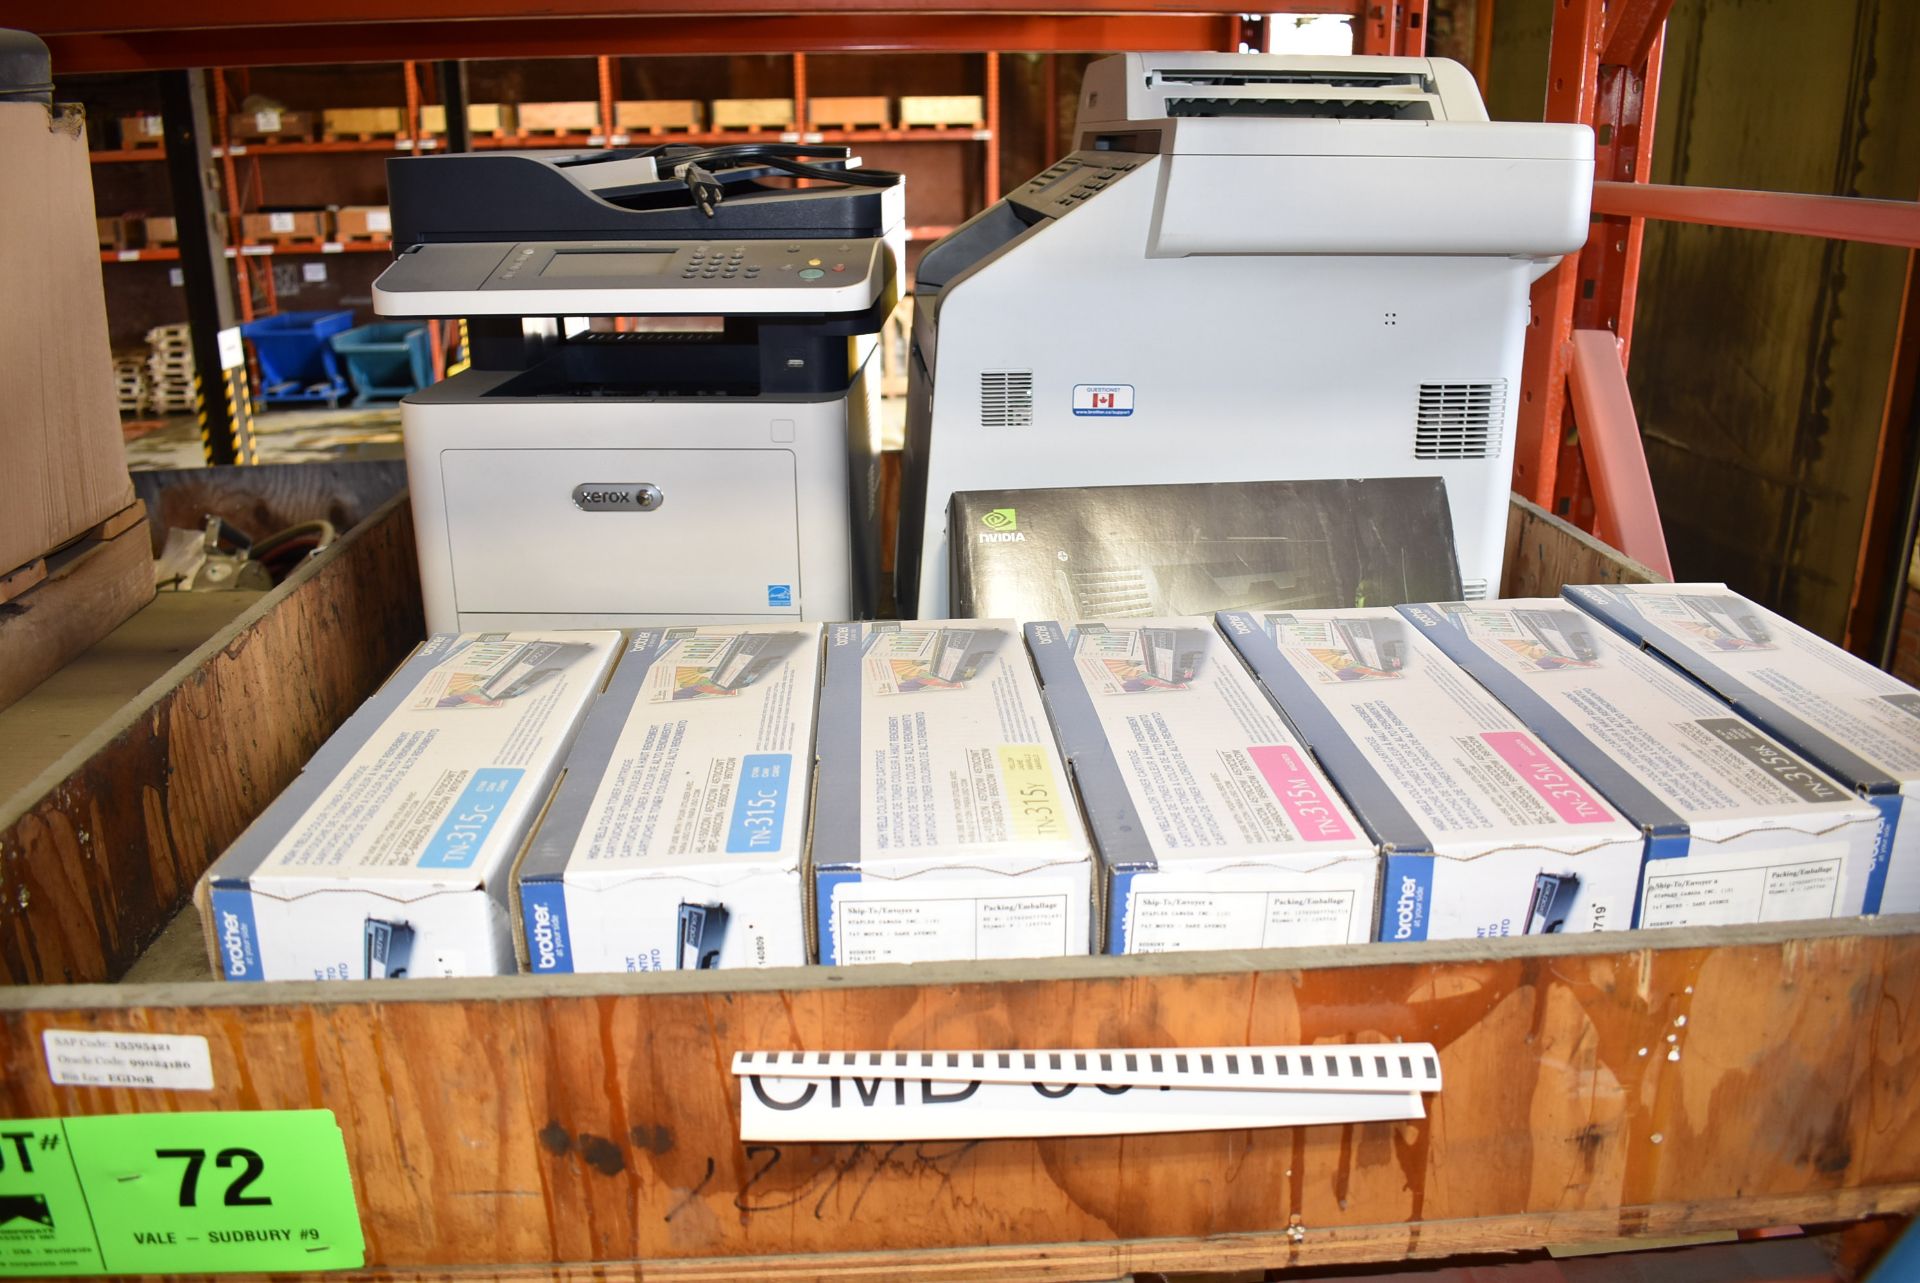 LOT/ BROTHER MFC-9970CDW COLOUR PRINTER, XEROX WORKCENTER 3335 MUTLIFUNCTION PRINTER, NVIDIA PC